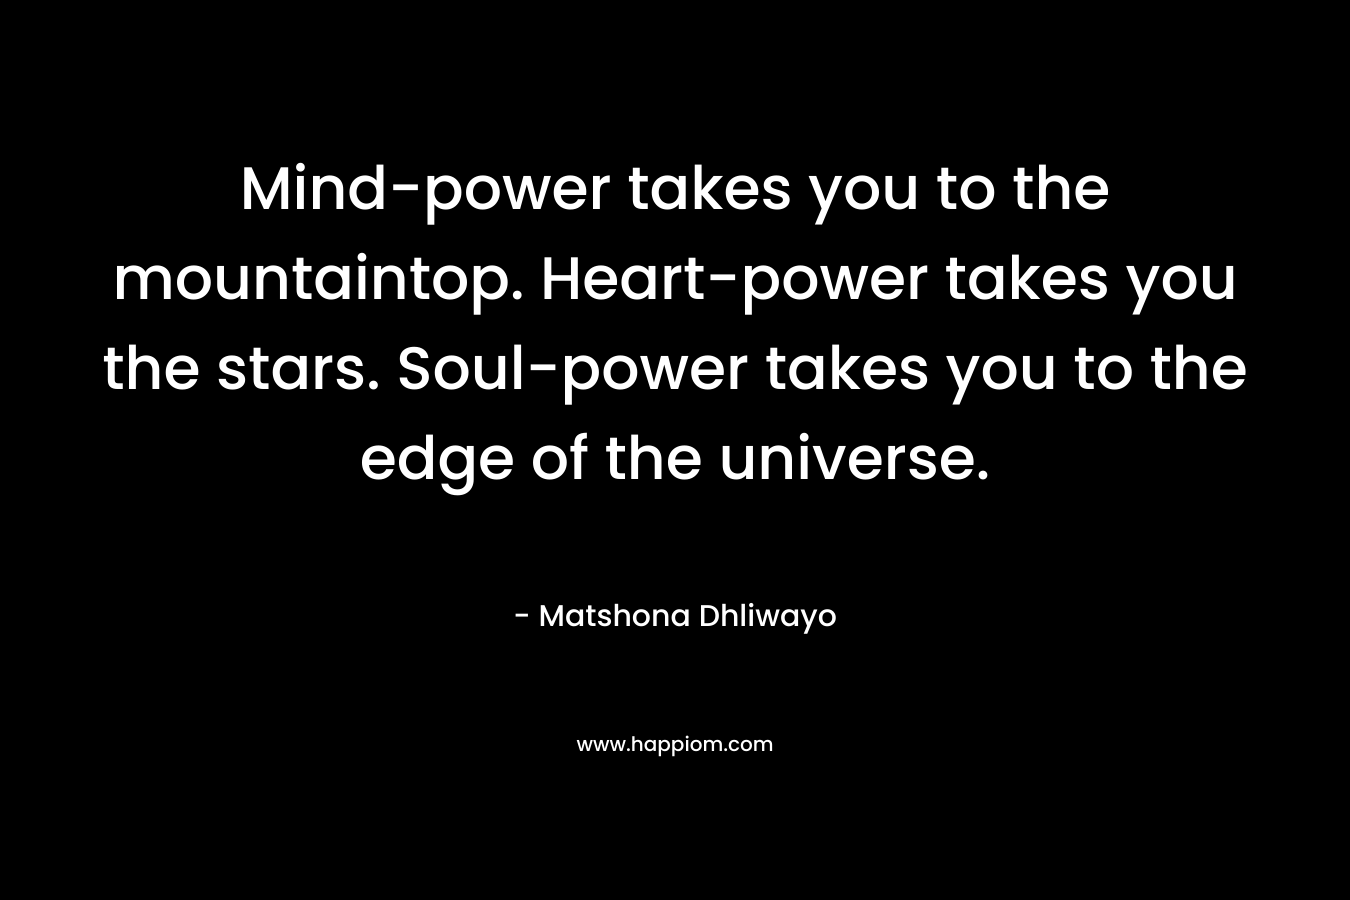 Mind-power takes you to the mountaintop. Heart-power takes you the stars. Soul-power takes you to the edge of the universe.